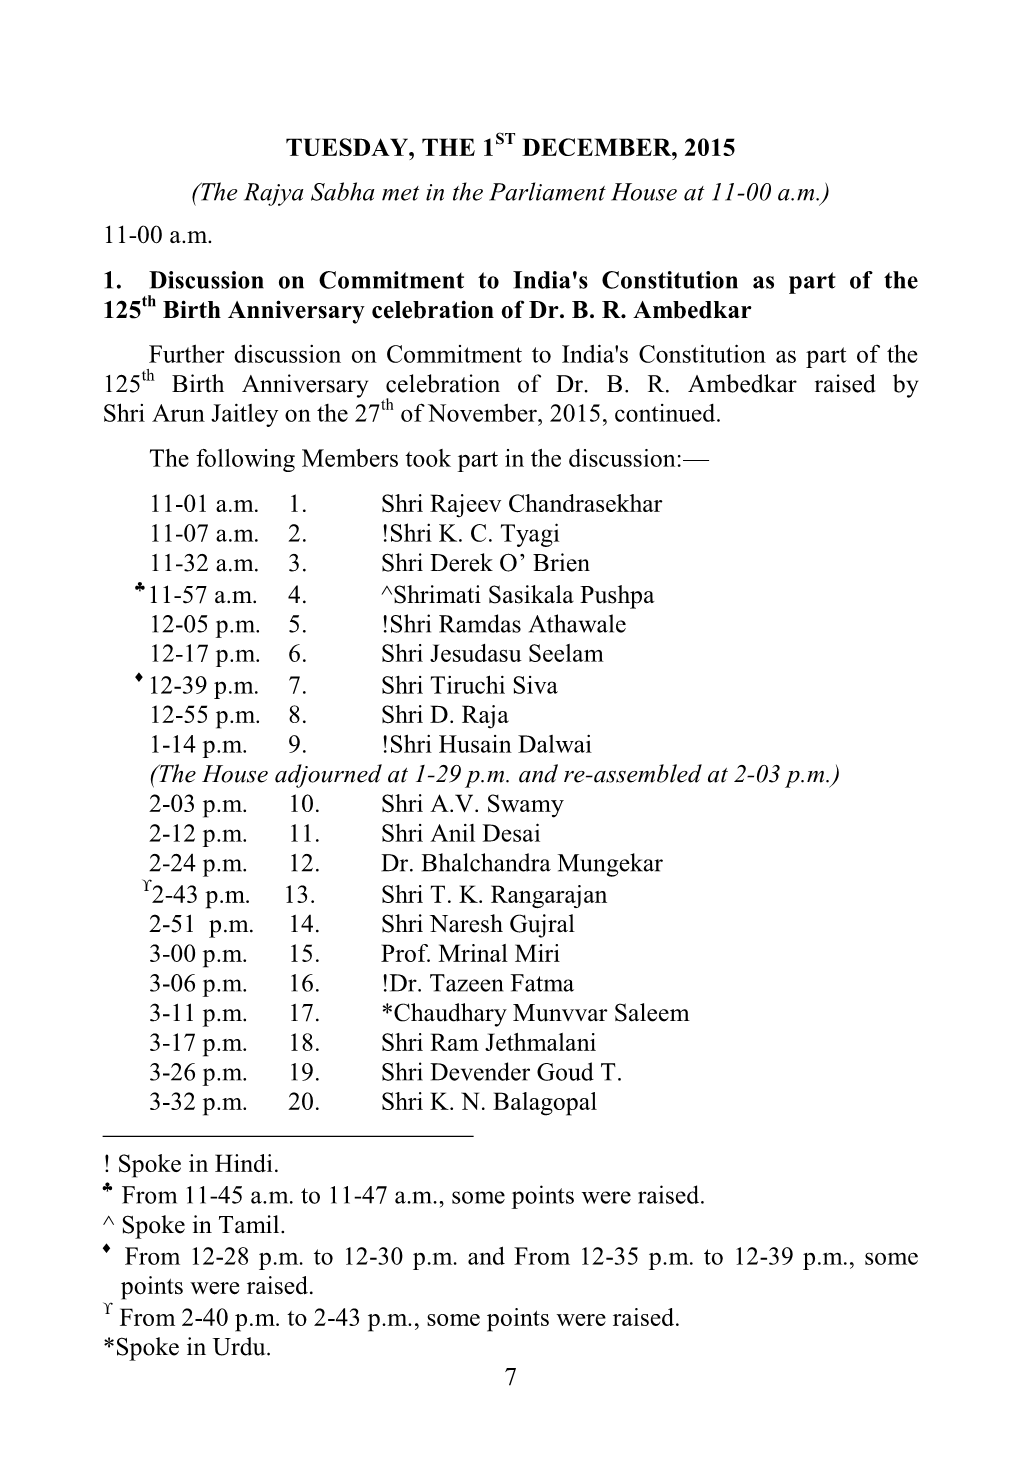 7 TUESDAY, the 1ST DECEMBER, 2015 (The Rajya Sabha Met in the Parliament House at 11-00 A.M.) 11-00 A.M. 1. Discussion on Commit